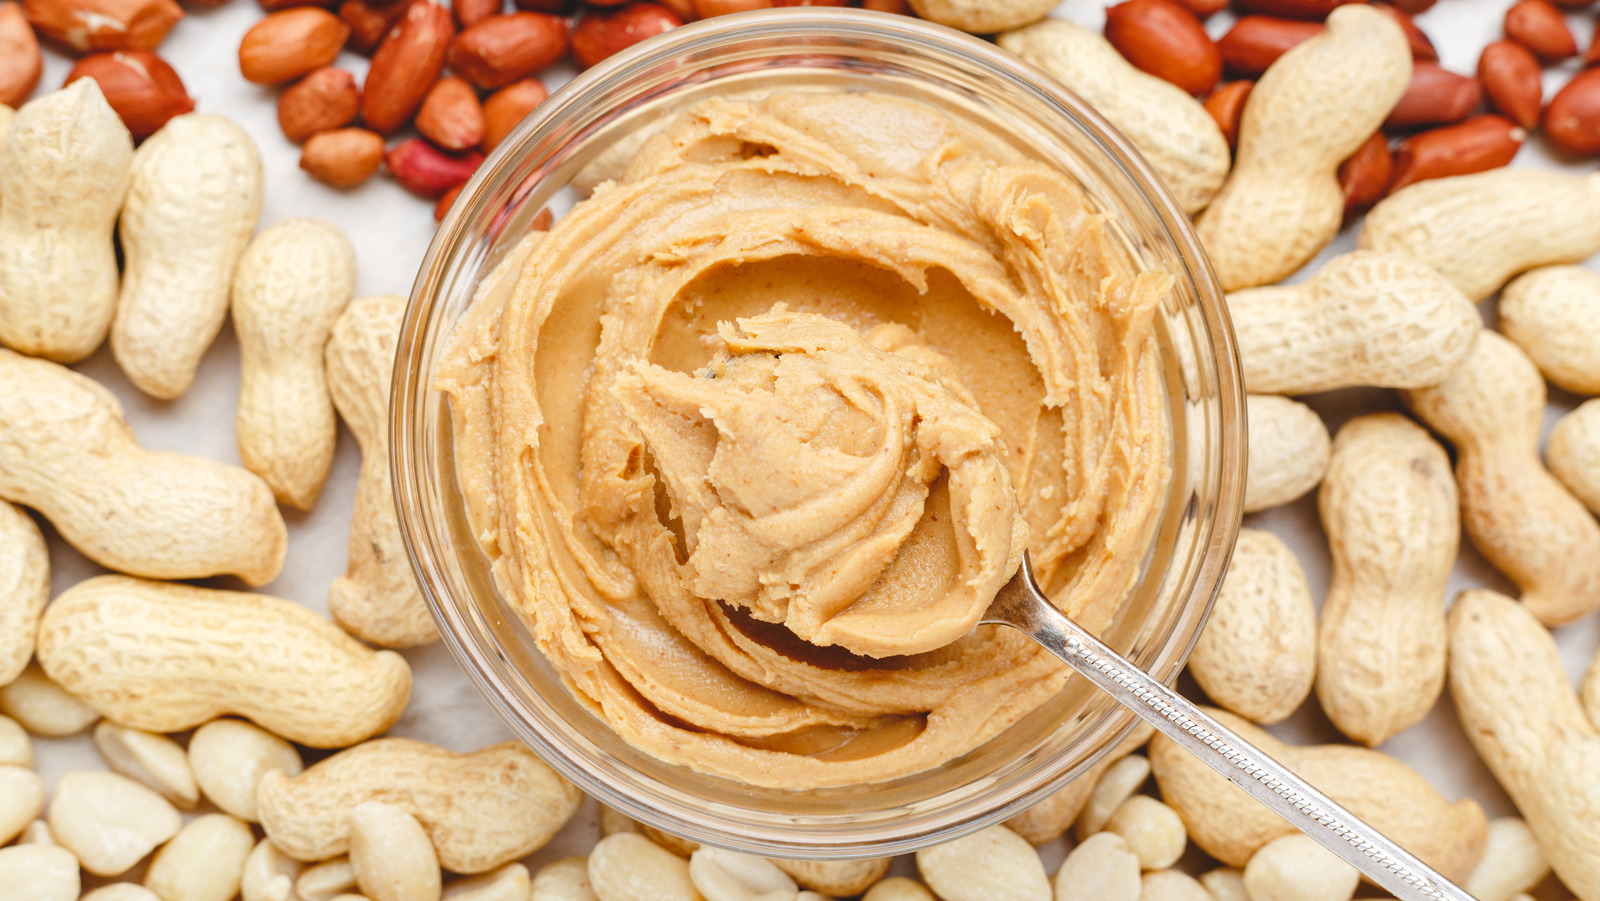 Is It Possible To Eat Too Much Peanut Butter?